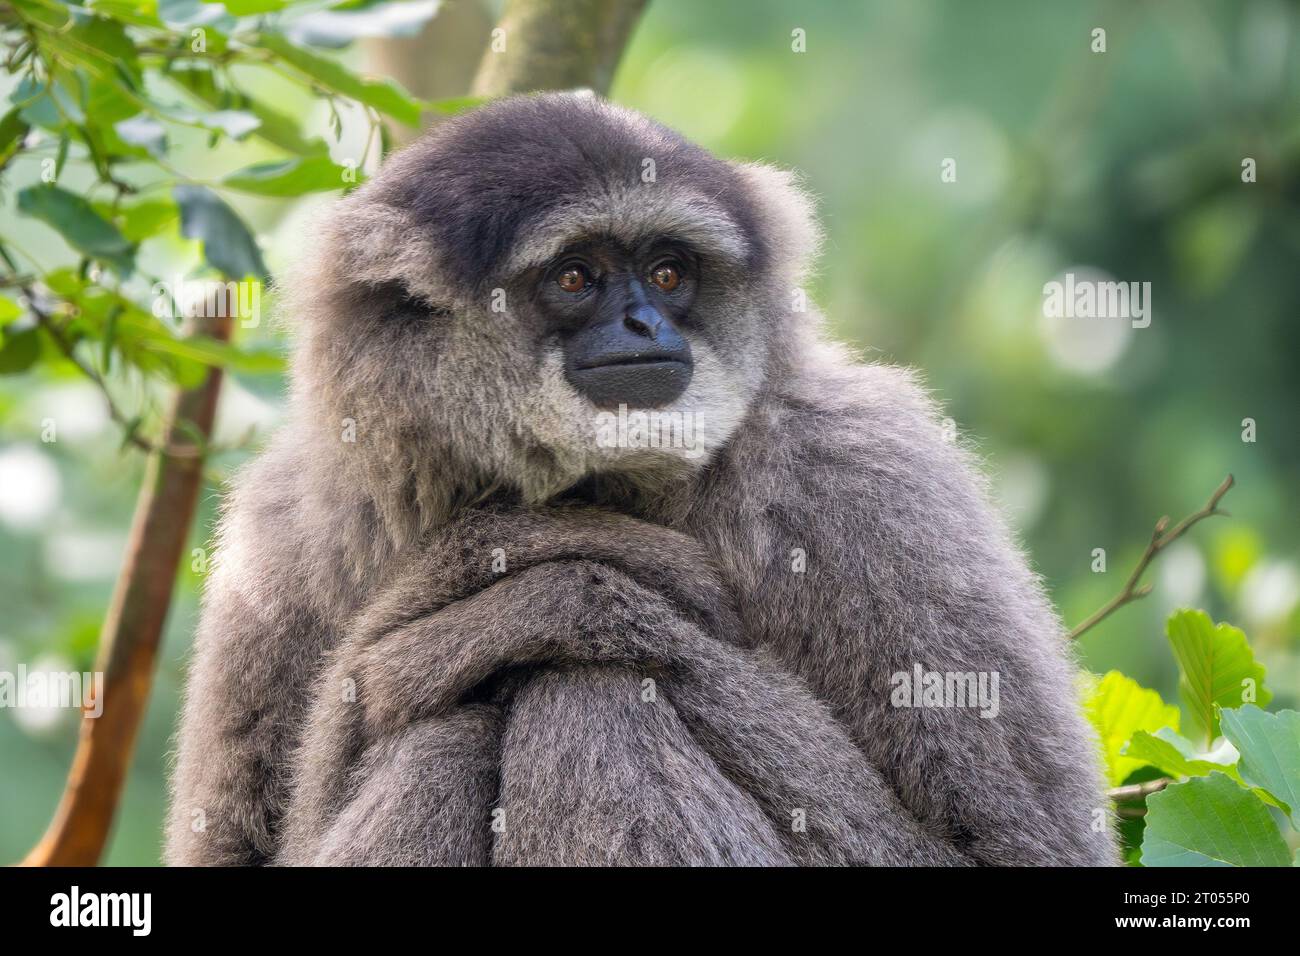 Silvery Gibbon - Hylobates moloch, portrait of beautiful primate endemic in Java forests, Indonesia. Stock Photo